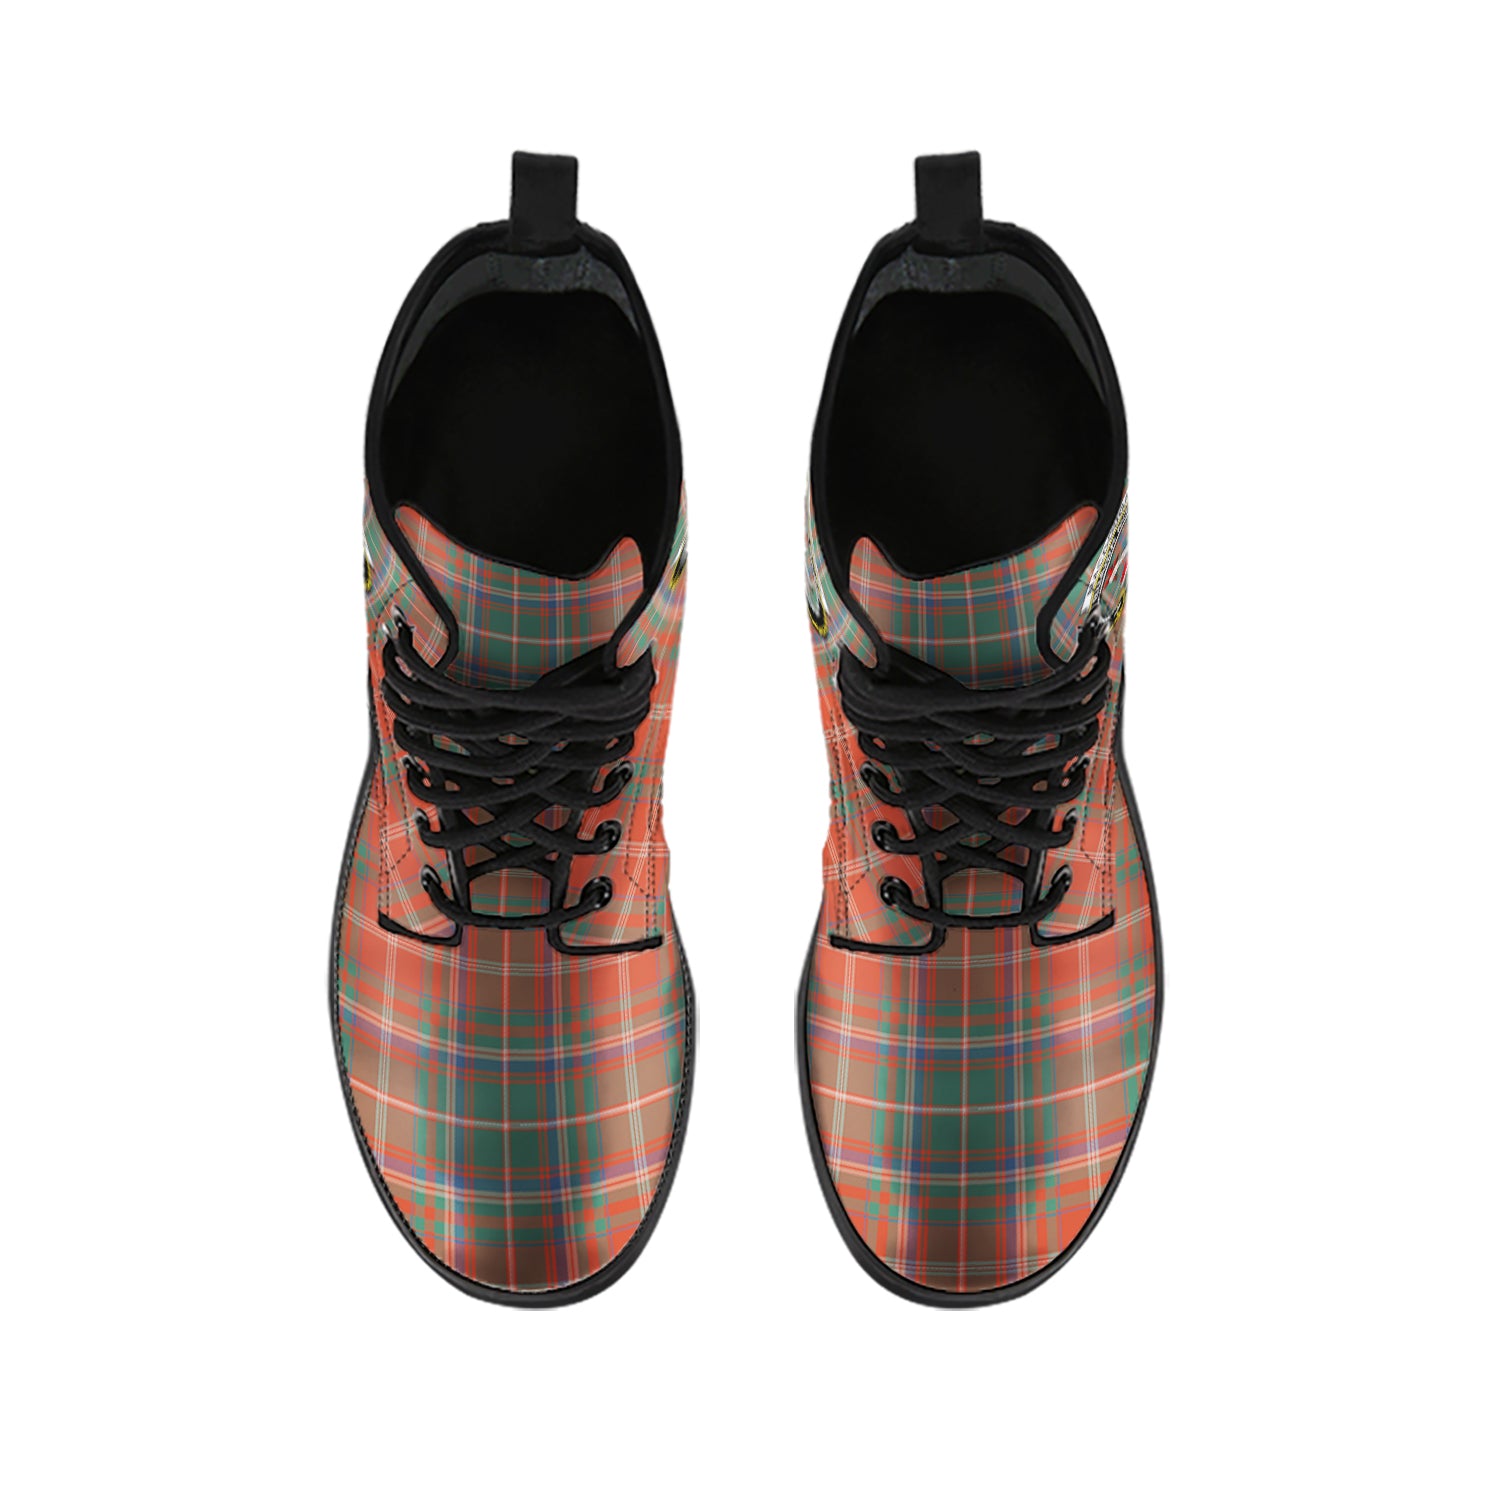 macdougall-ancient-tartan-leather-boots-with-family-crest